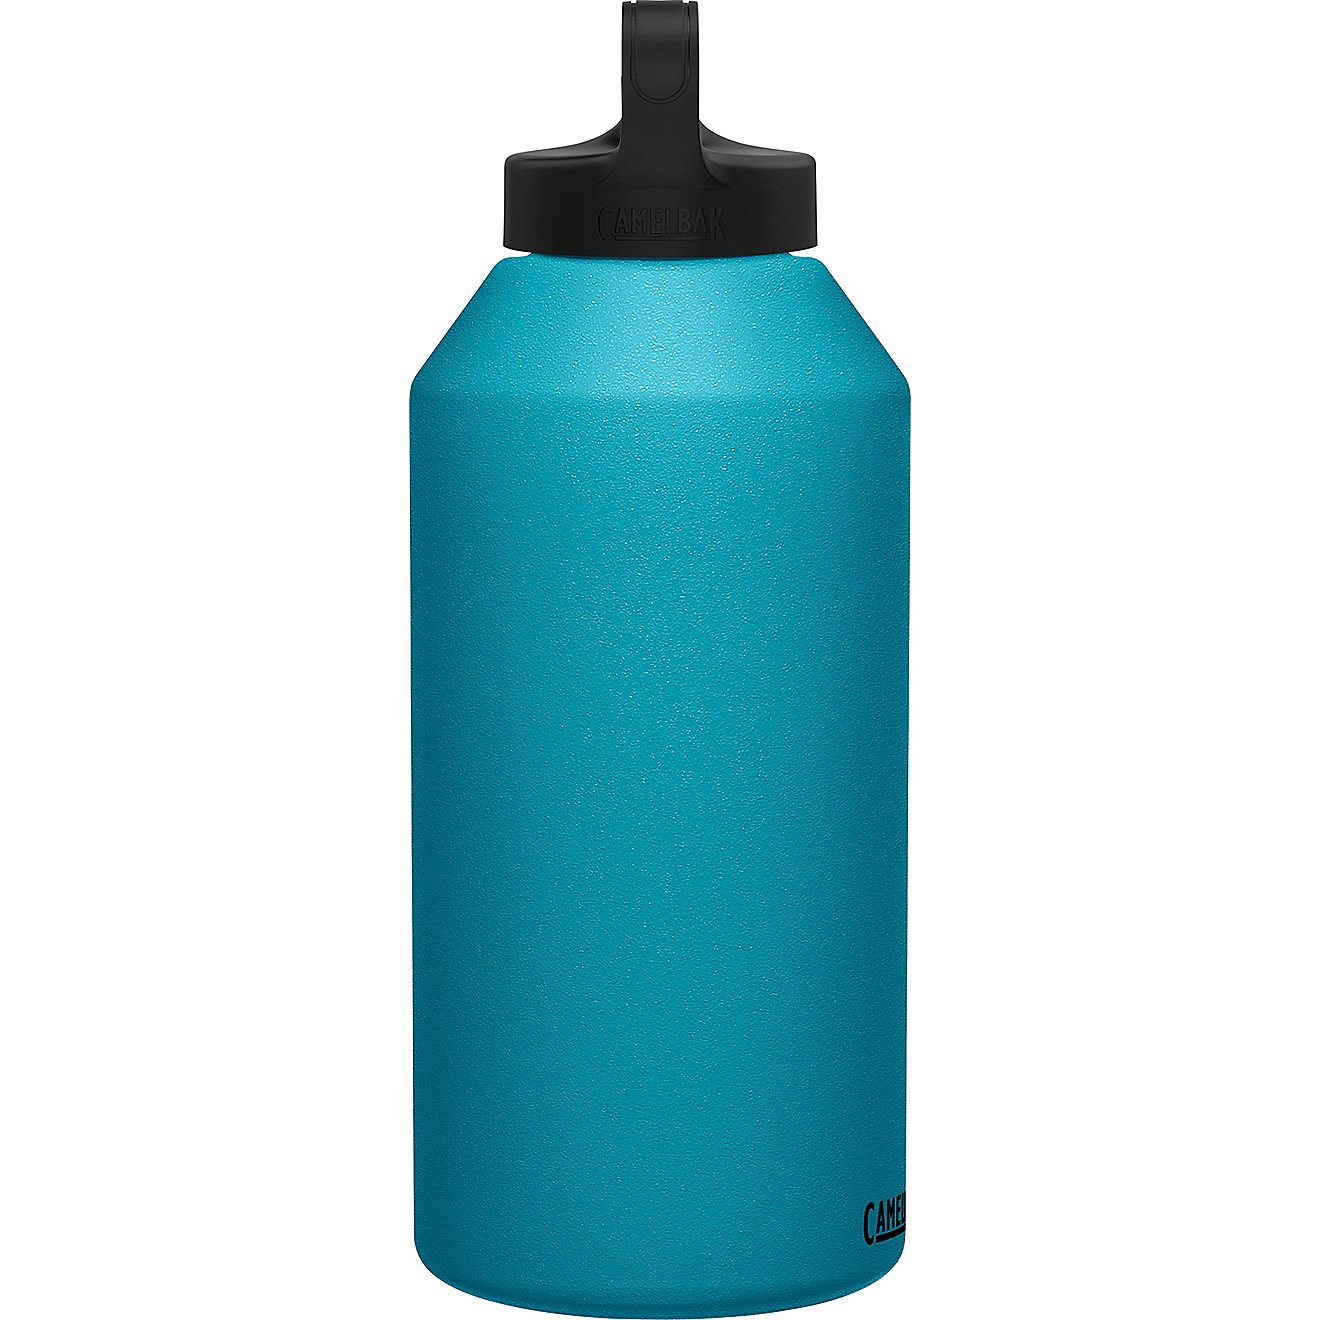 CamelBak Carry Cap 64 oz Insulated Stainless Steel Water Bottle                                                                  - view number 3